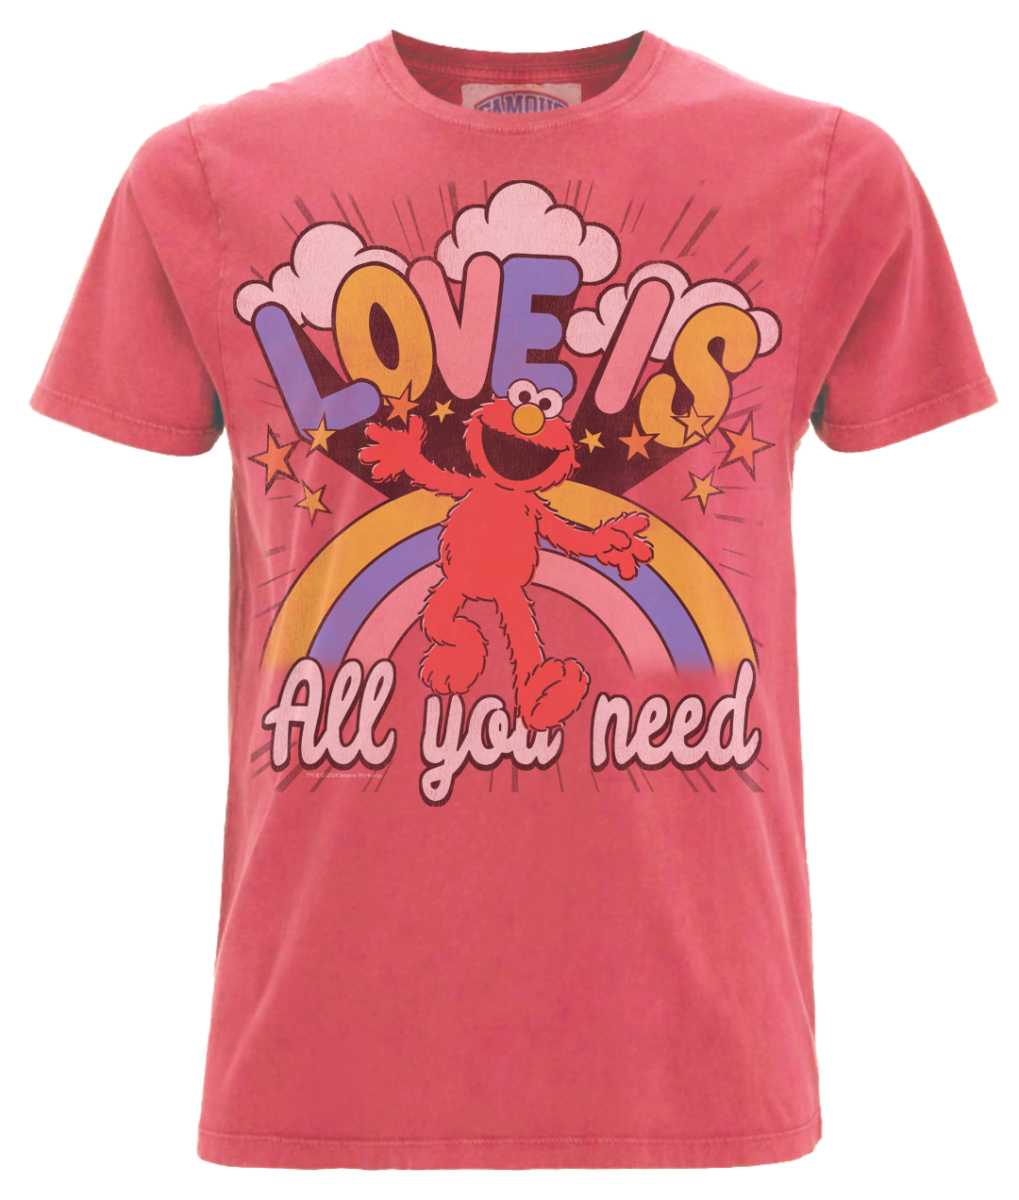 Exclusive Famous Forever vintage washed red short sleeve crew neck t-shirt featuring retro Sesame Street Elmo with rainbow and stars design with Love Is All You Need text. Full colour design with a vintage style. Officially Licenced